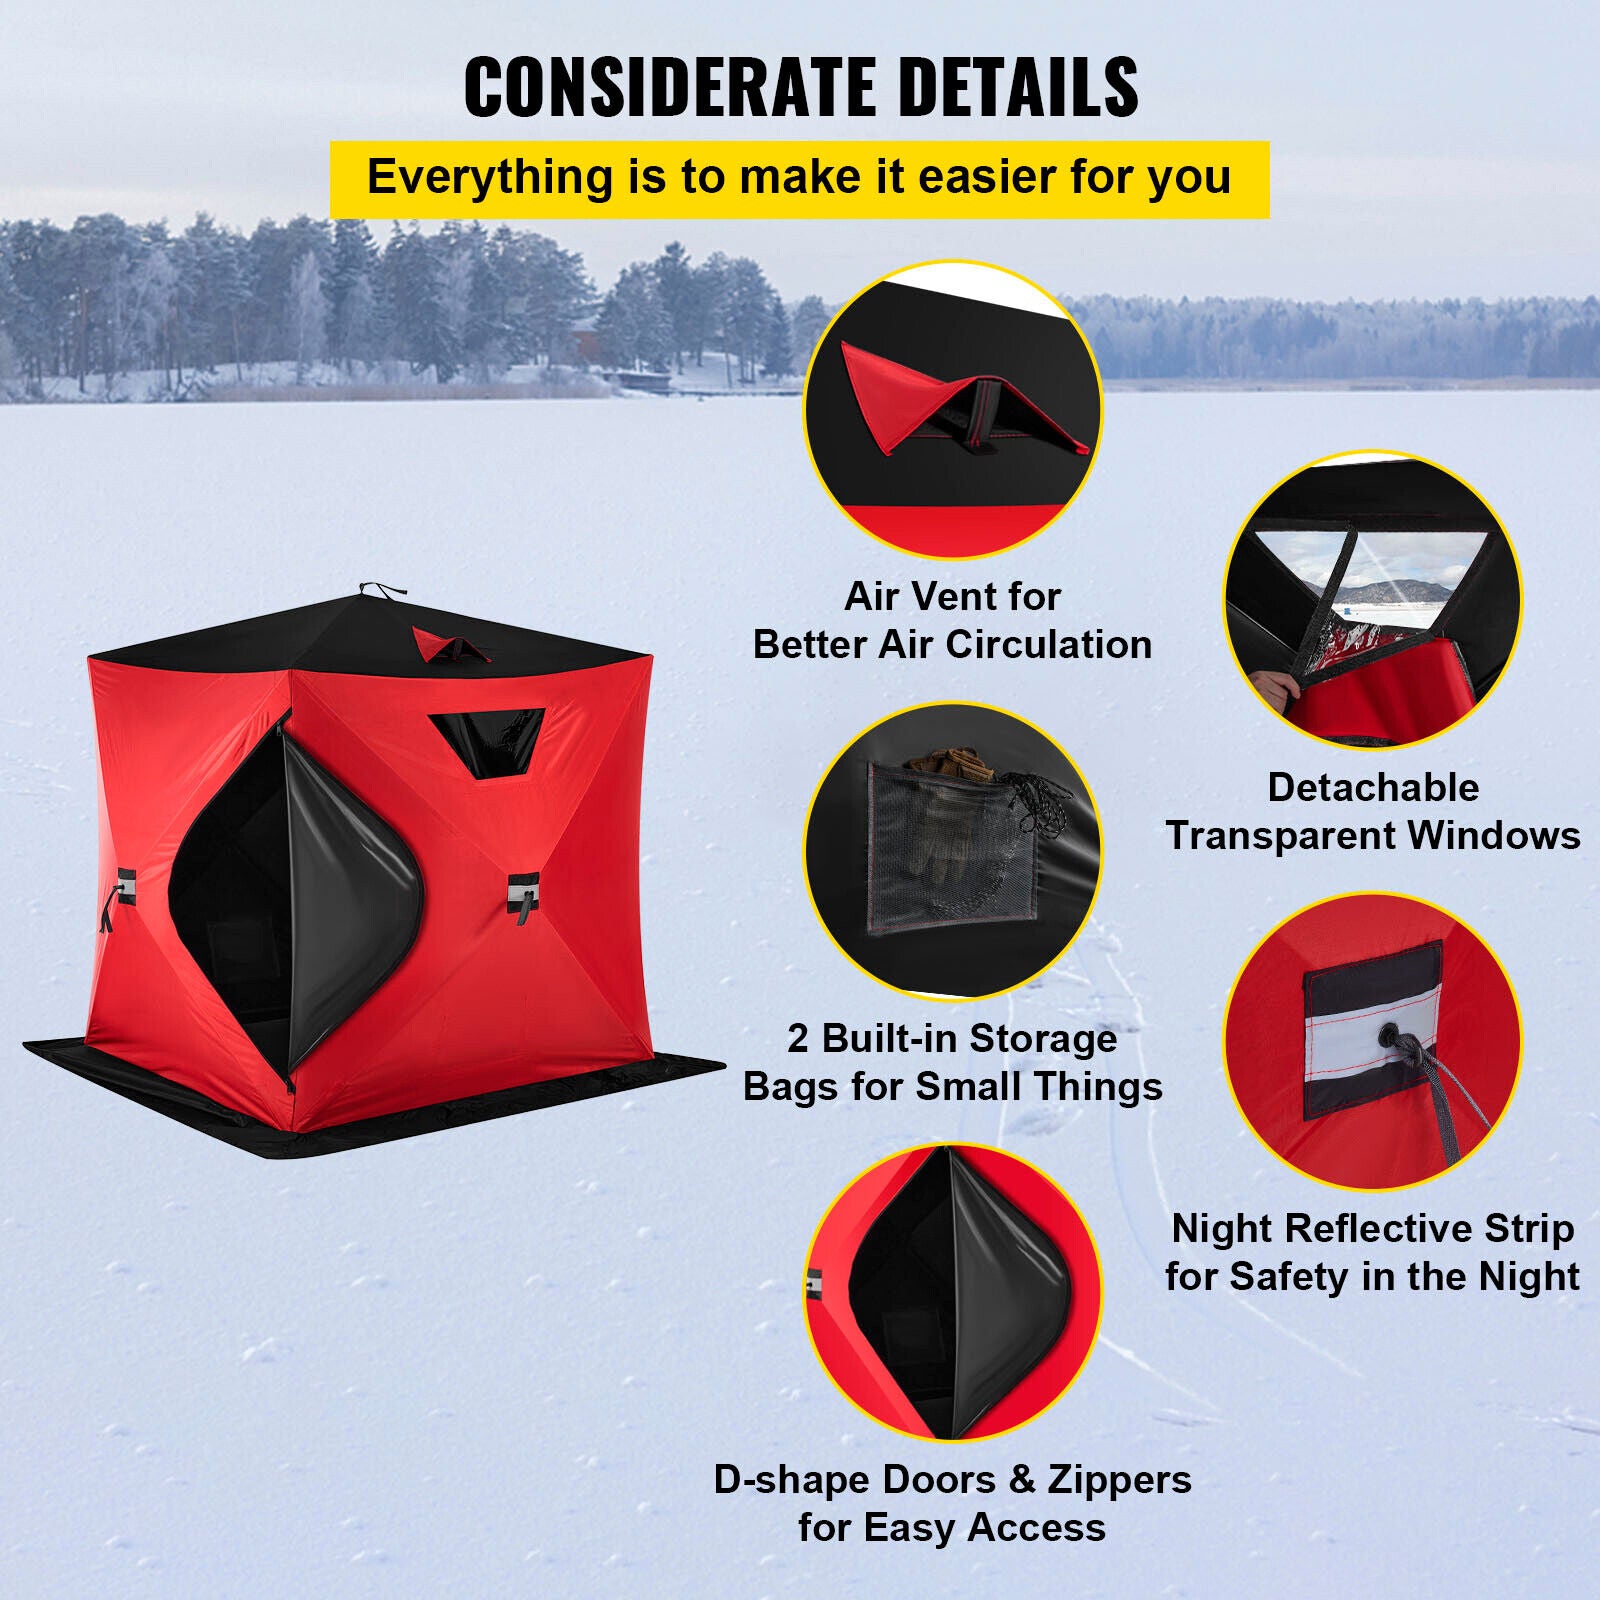 VEVOR Ice Fishing Tent Waterproof Pop-up 2-Person Carrying Bag Ice Shelter Fishi